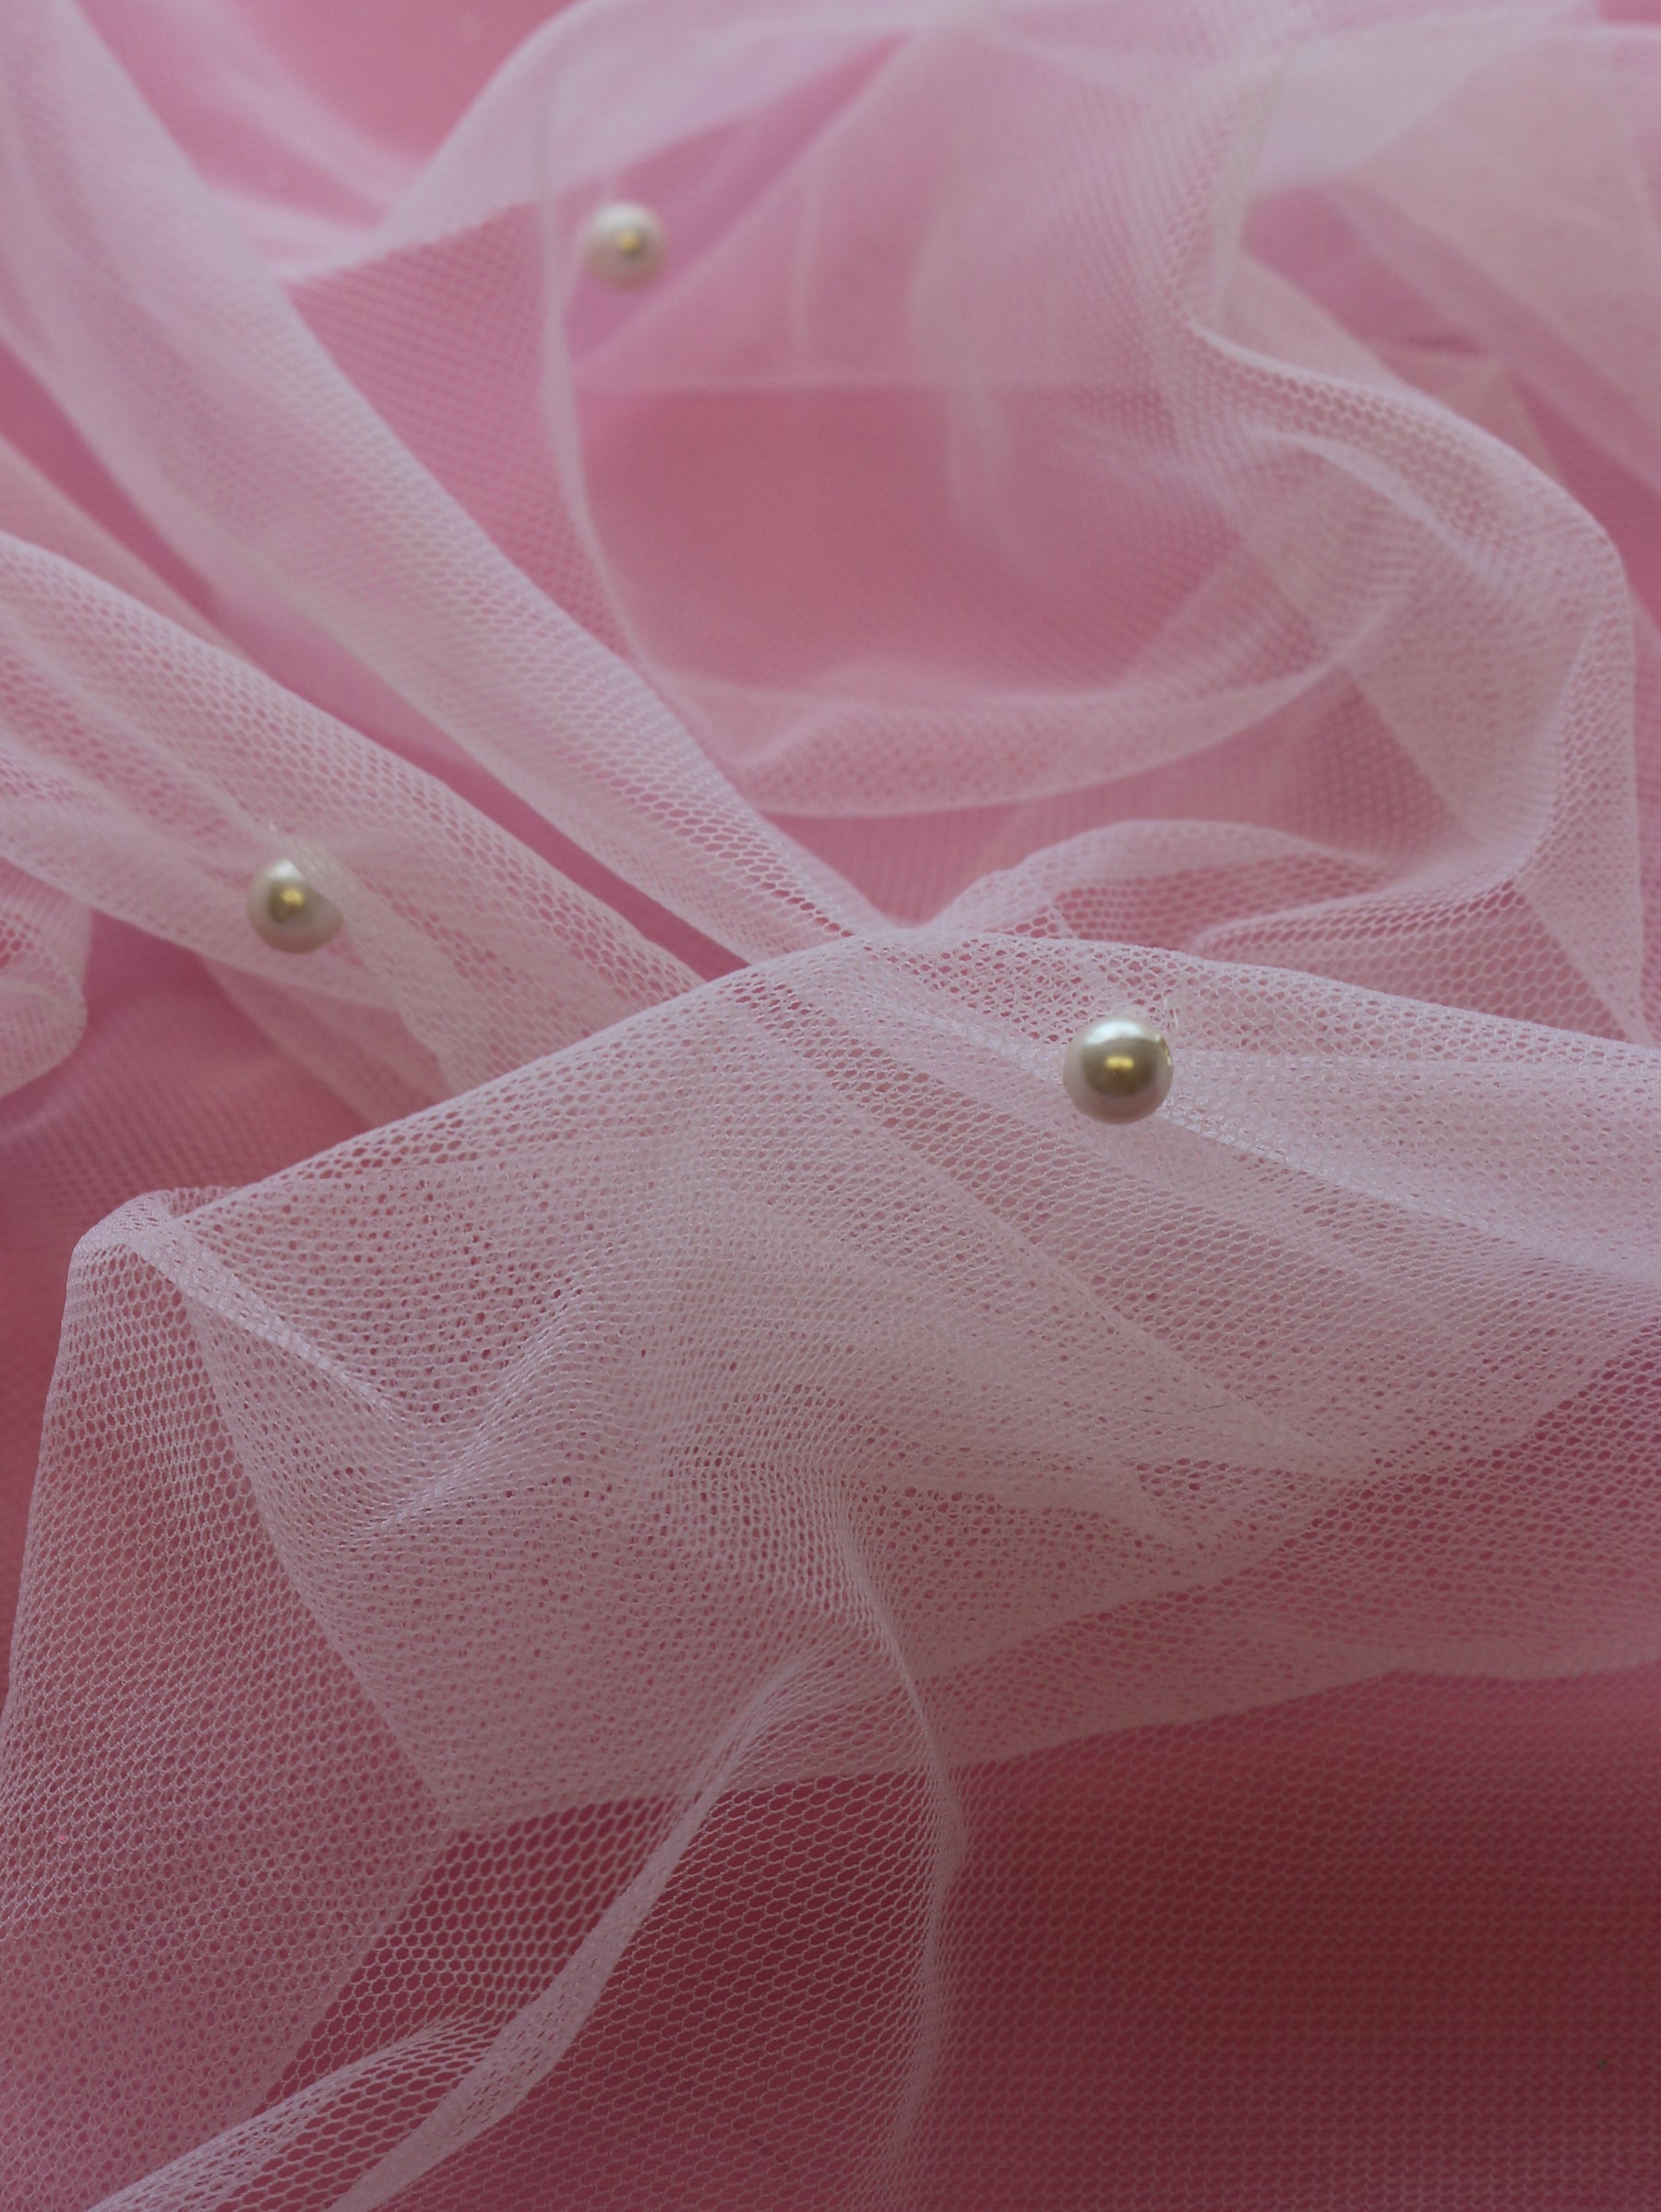 Tulle - Pink  The fabric baron